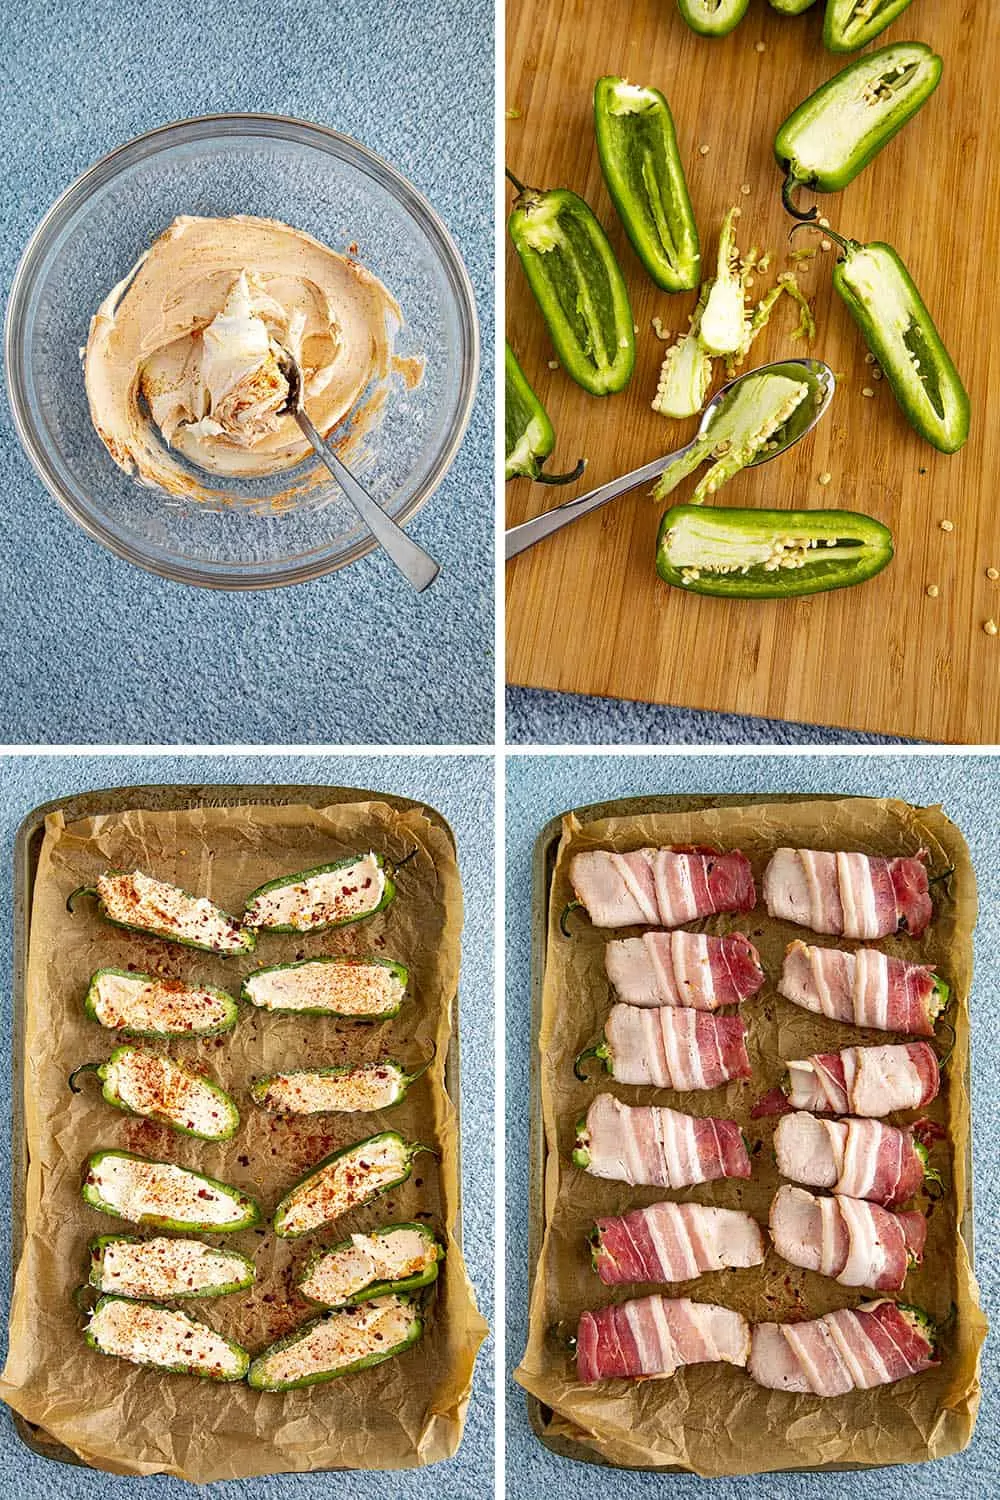 Steps for making Smoked Jalapeno Poppers, including the stuffing, coring the peppers, stuffing the peppers and wrapping them in bacon